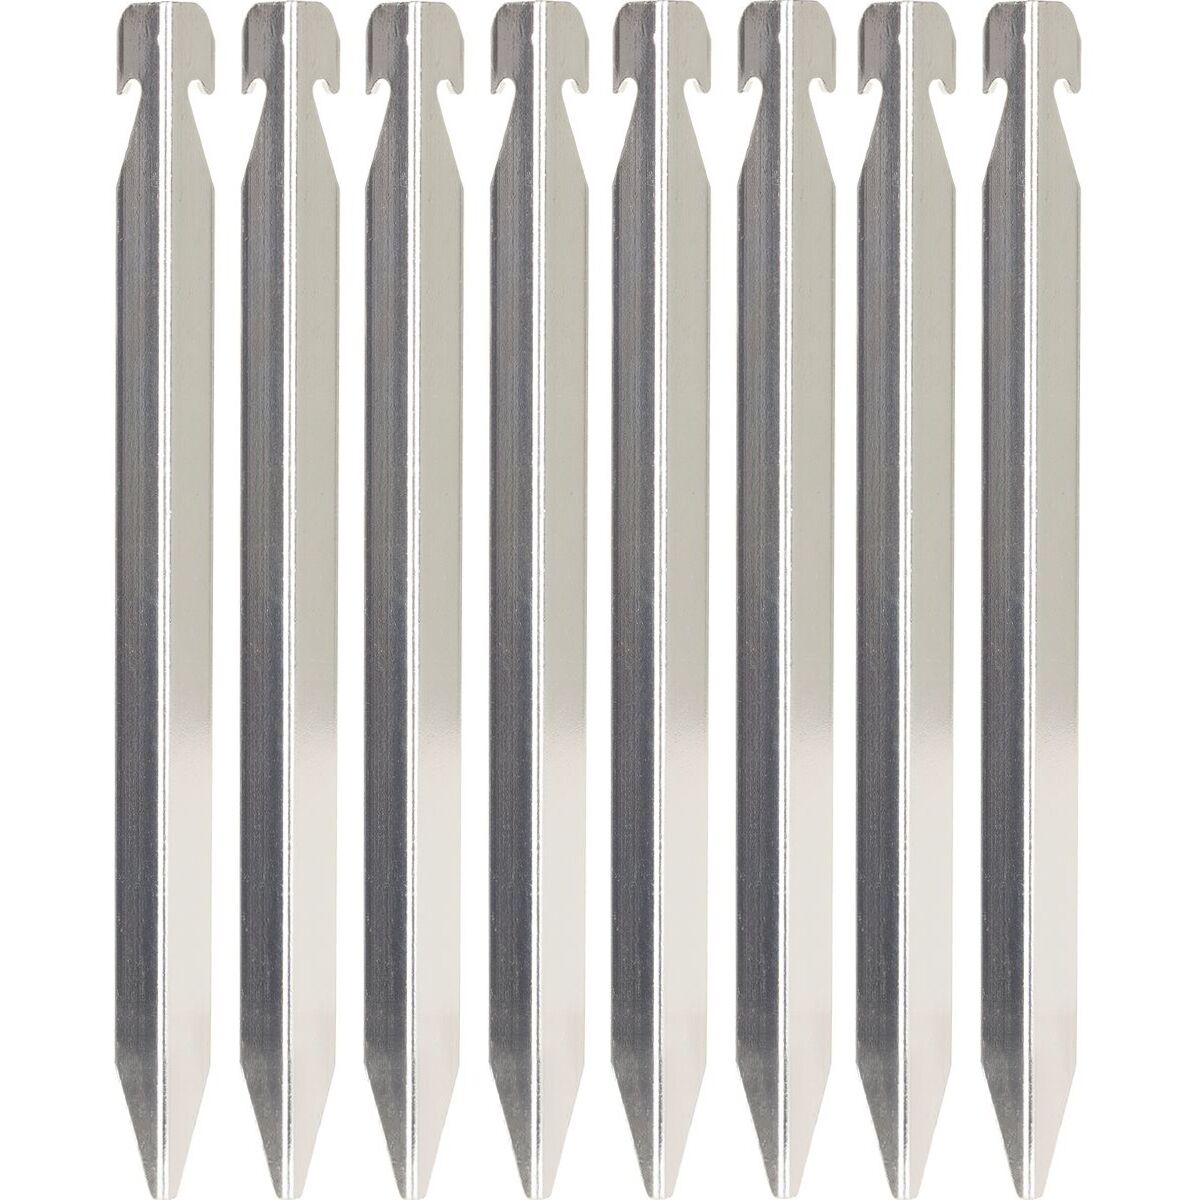 Mountainsmith Tent Stakes - 8-Pack